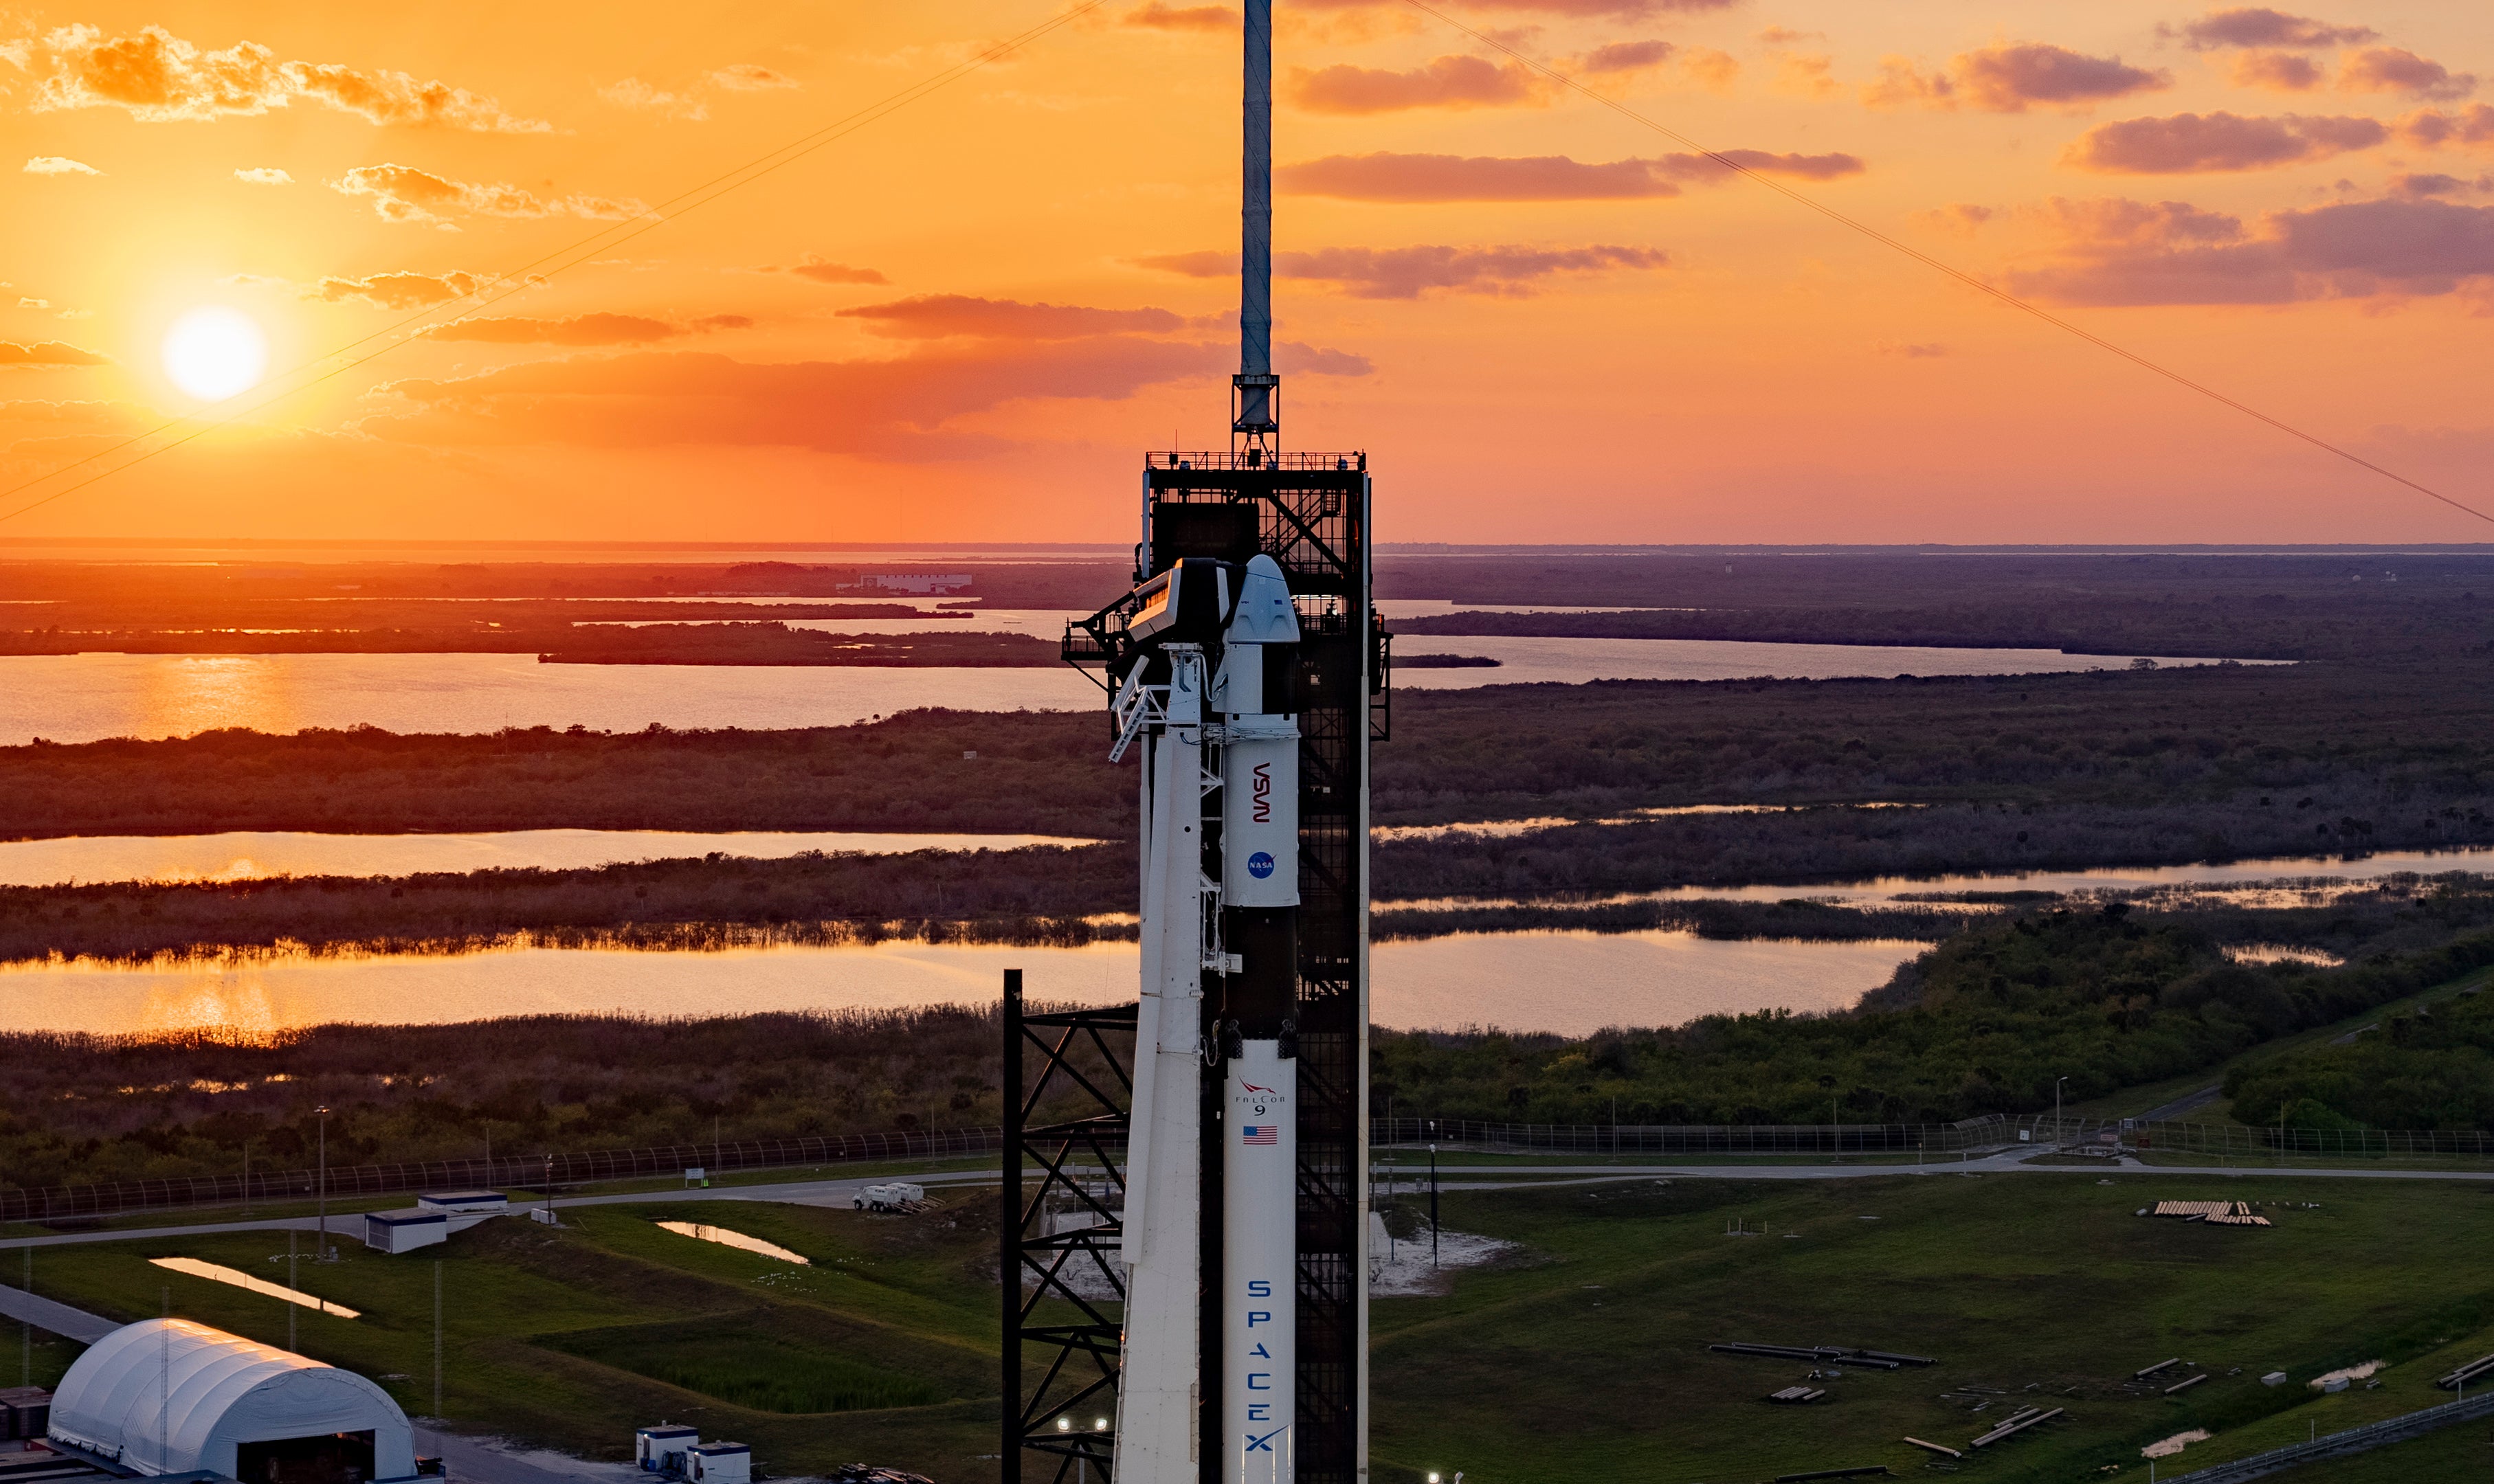 NASA says Crew-6 mission was delayed due to a rocket ignition issue, SpaceX is now ready for an early morning launch on March 2nd –Watch It Live!